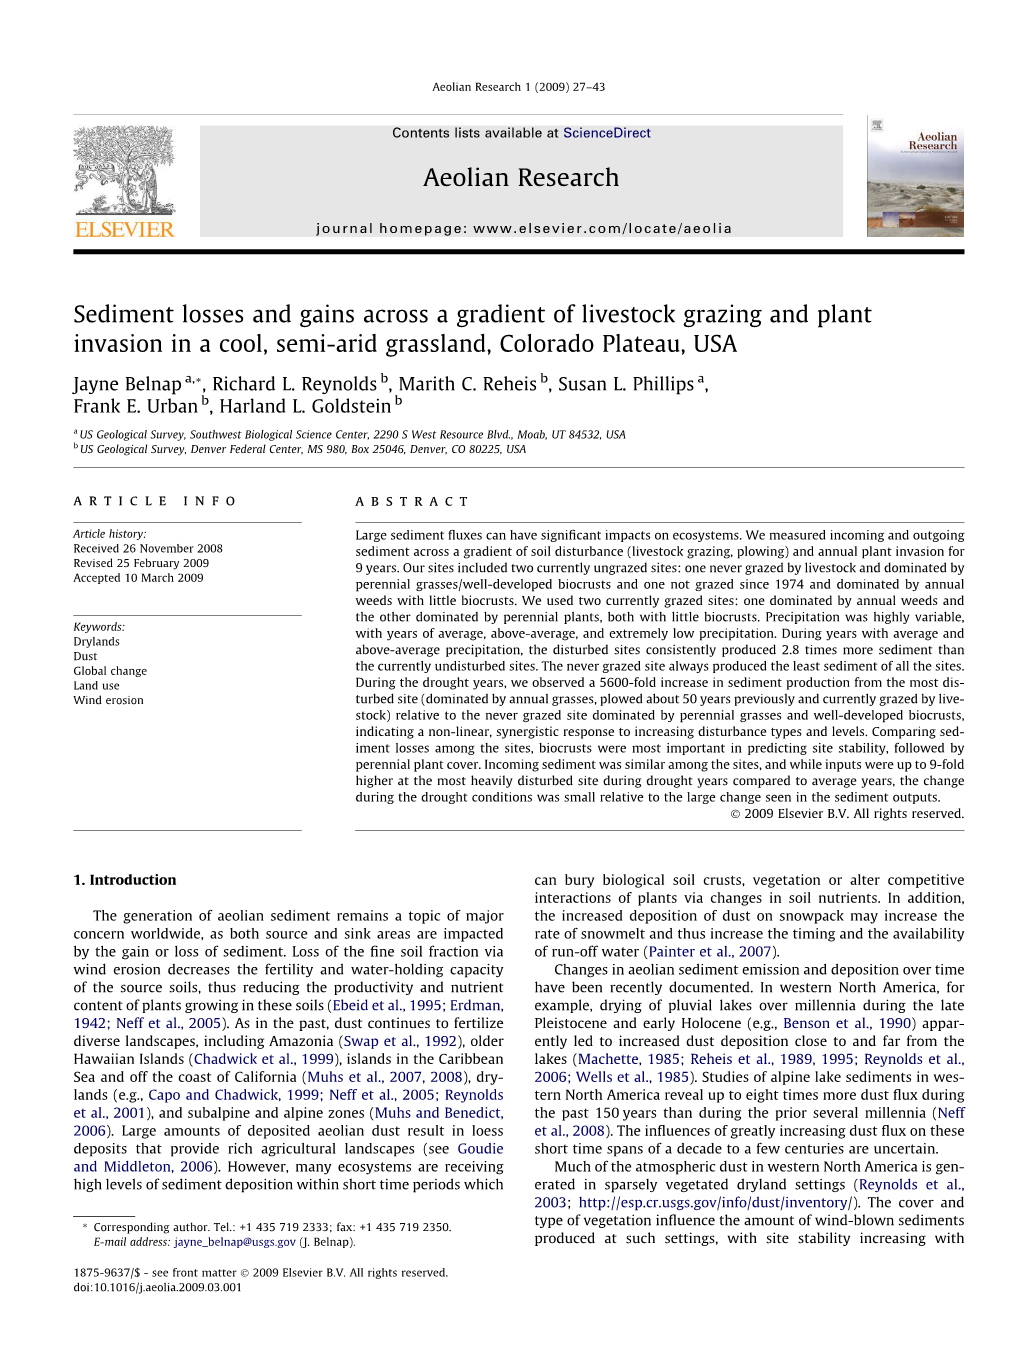 Sediment Losses and Gains Across a Gradient of Livestock Grazing and Plant Invasion in a Cool, Semi-Arid Grassland, Colorado Plateau, USA